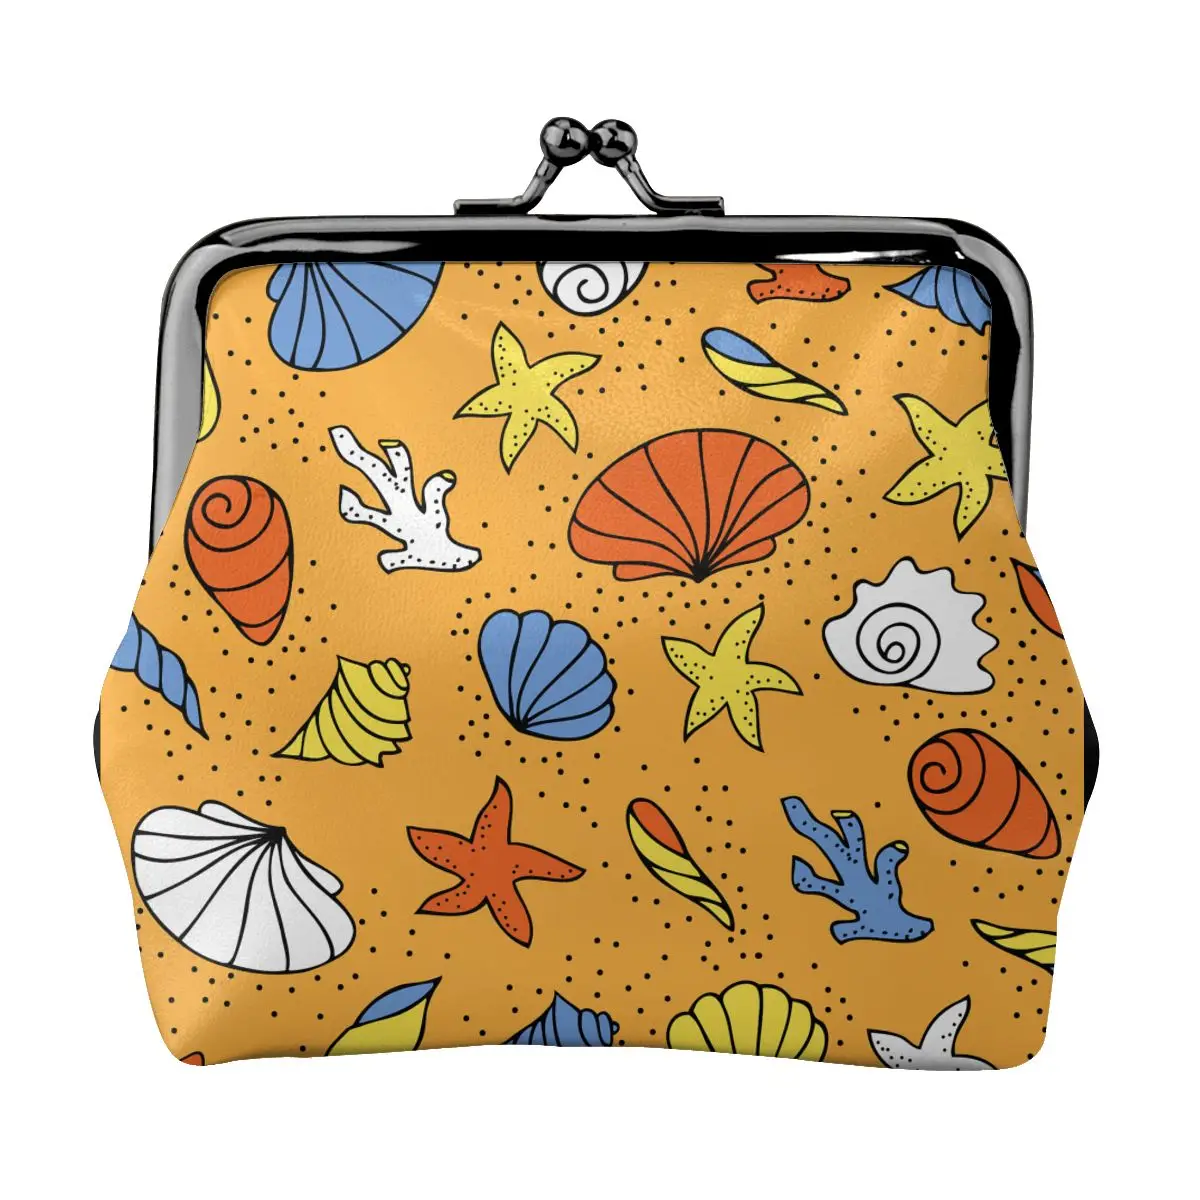 

River Shells Starfish And Corals On The Sand Mini Small Wallet Change Bag Coin Purse Money Bag Key Earbuds Storage Ba